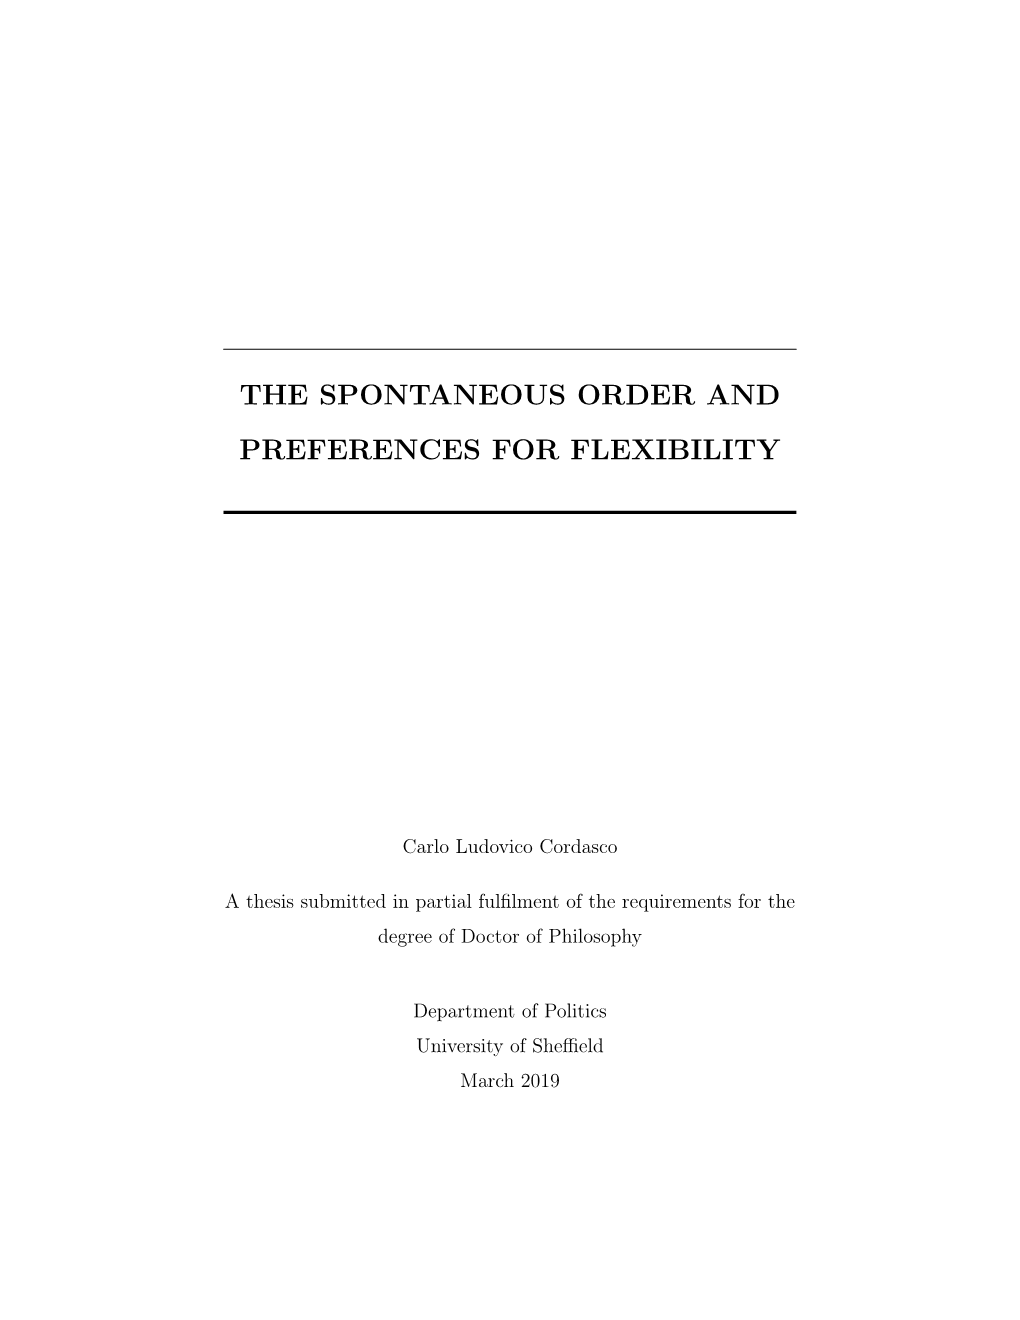 The Spontaneous Order and Preferences for Flexibility